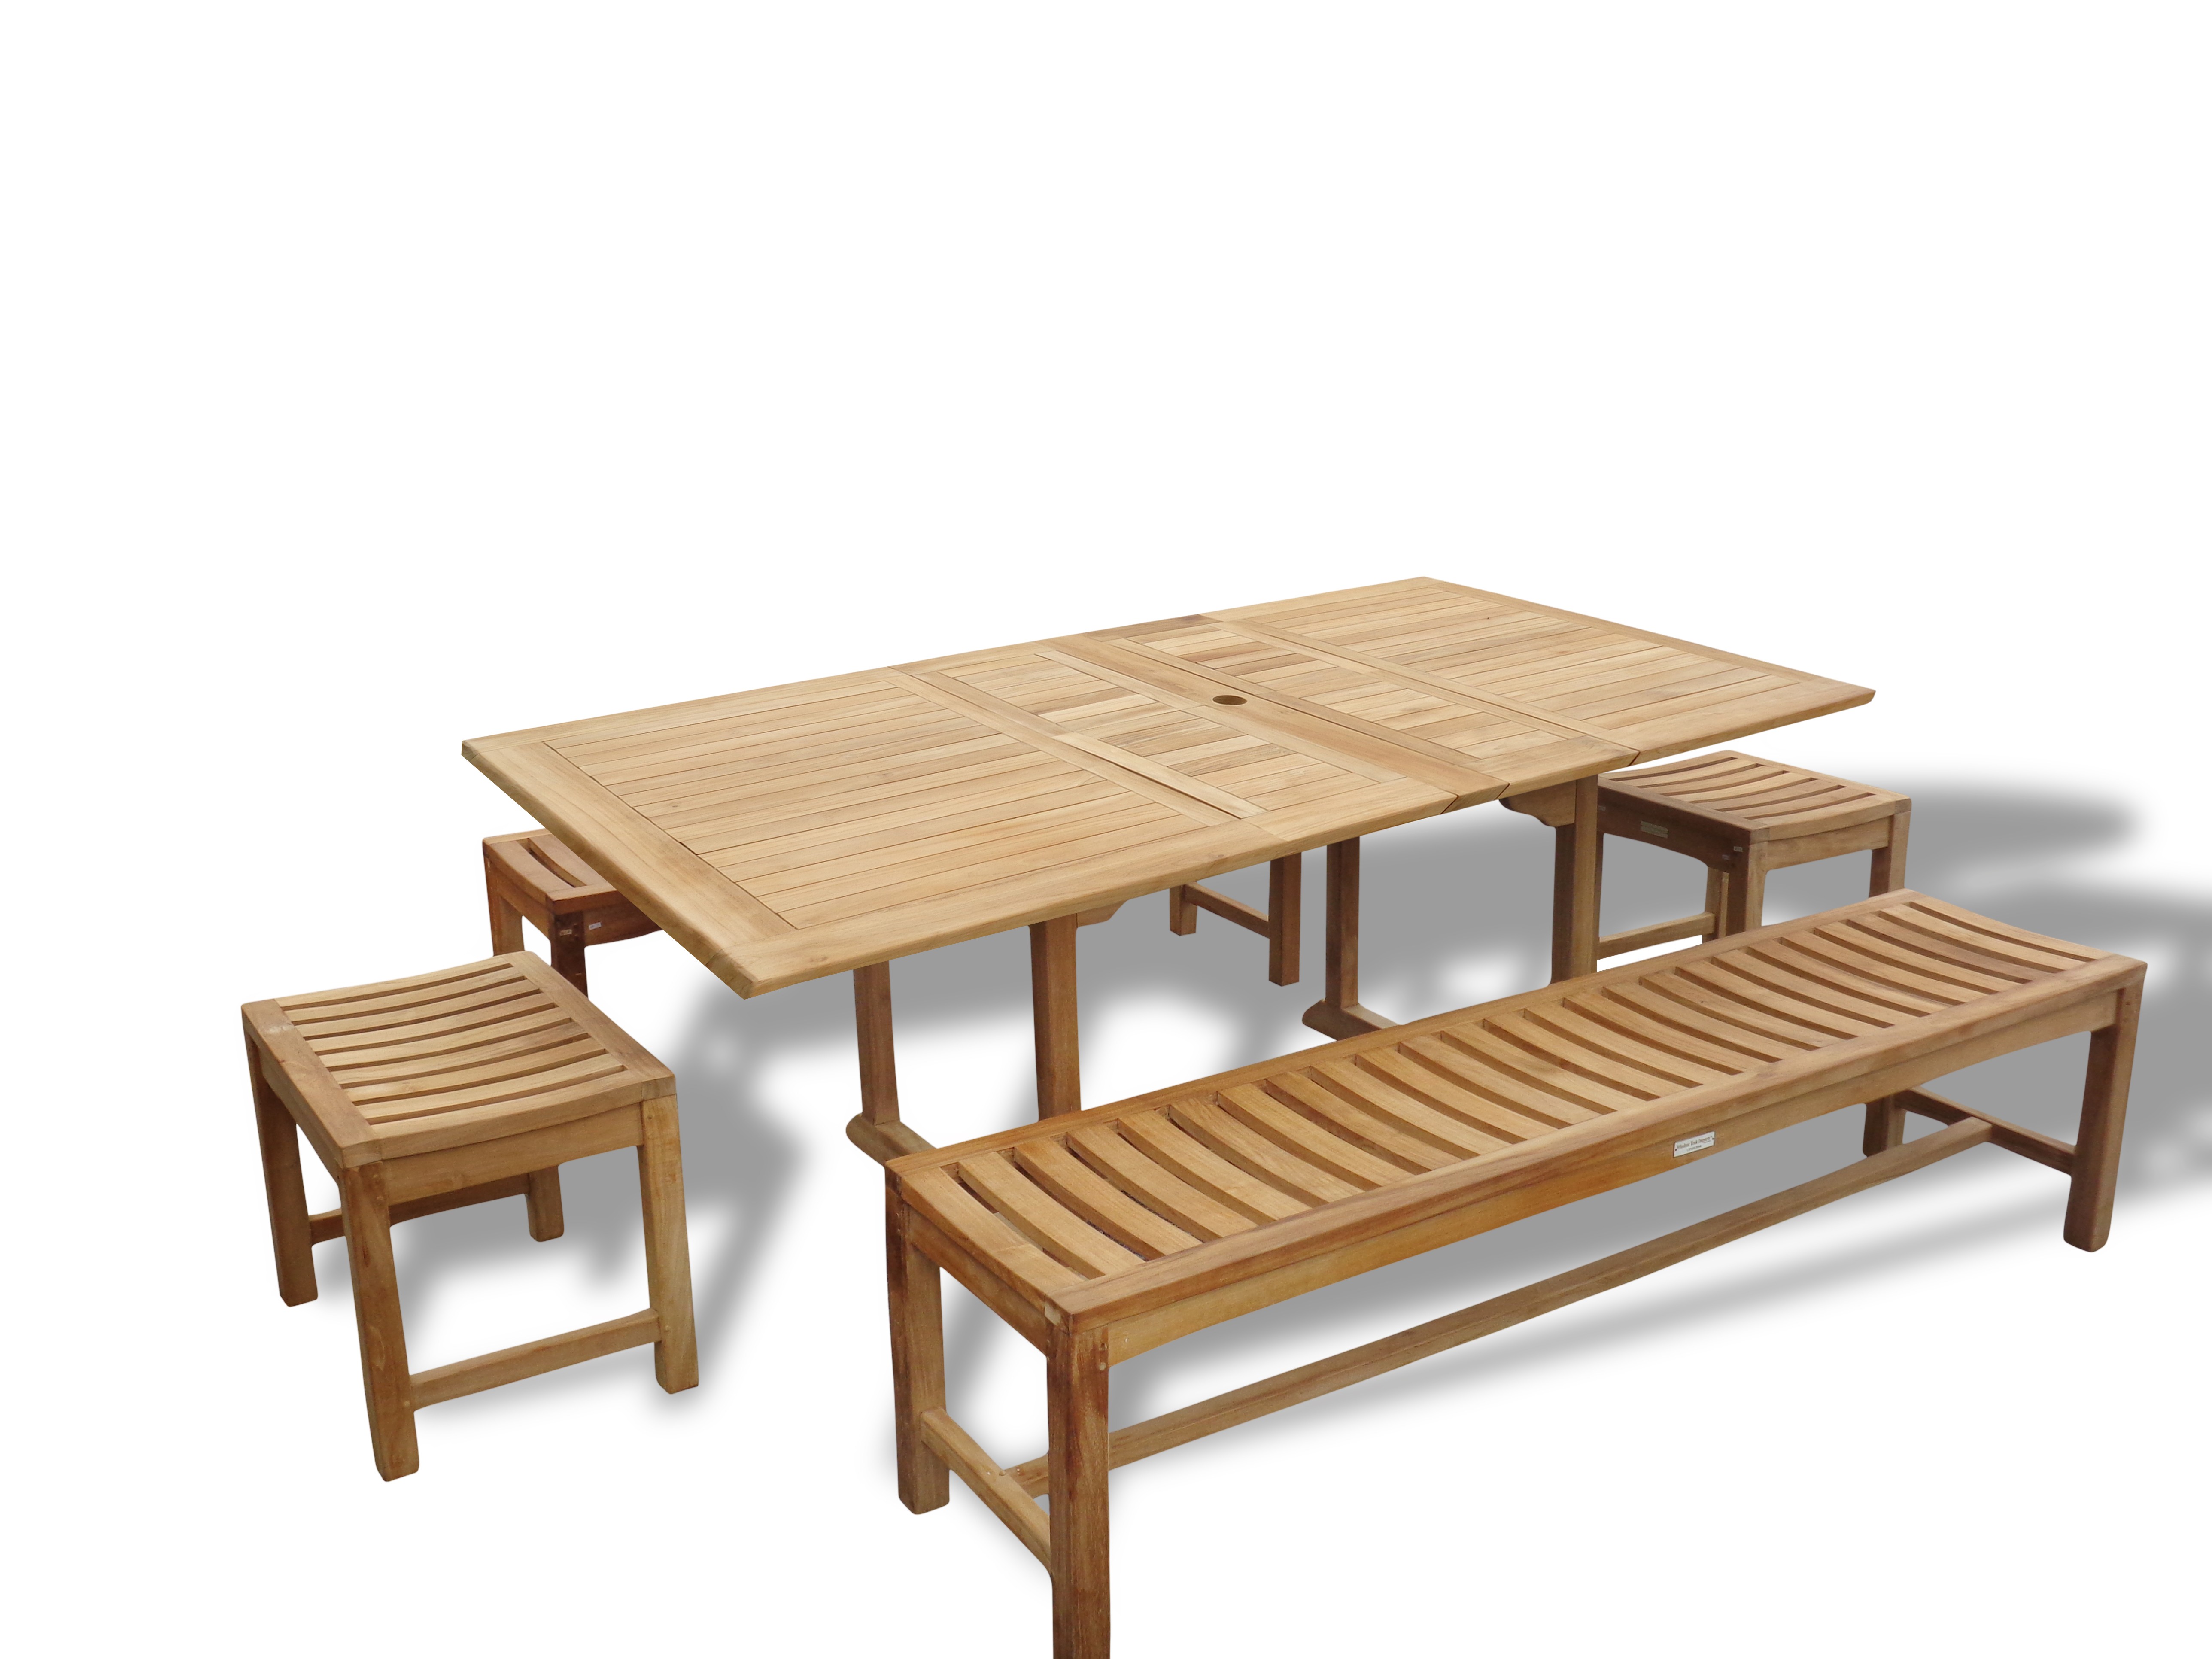 Buckingham 82" x 39" Premium Teak Double Leaf Rectangular Extension Table w Two 72" & Two 18" Backless Benches...Seats 8-10